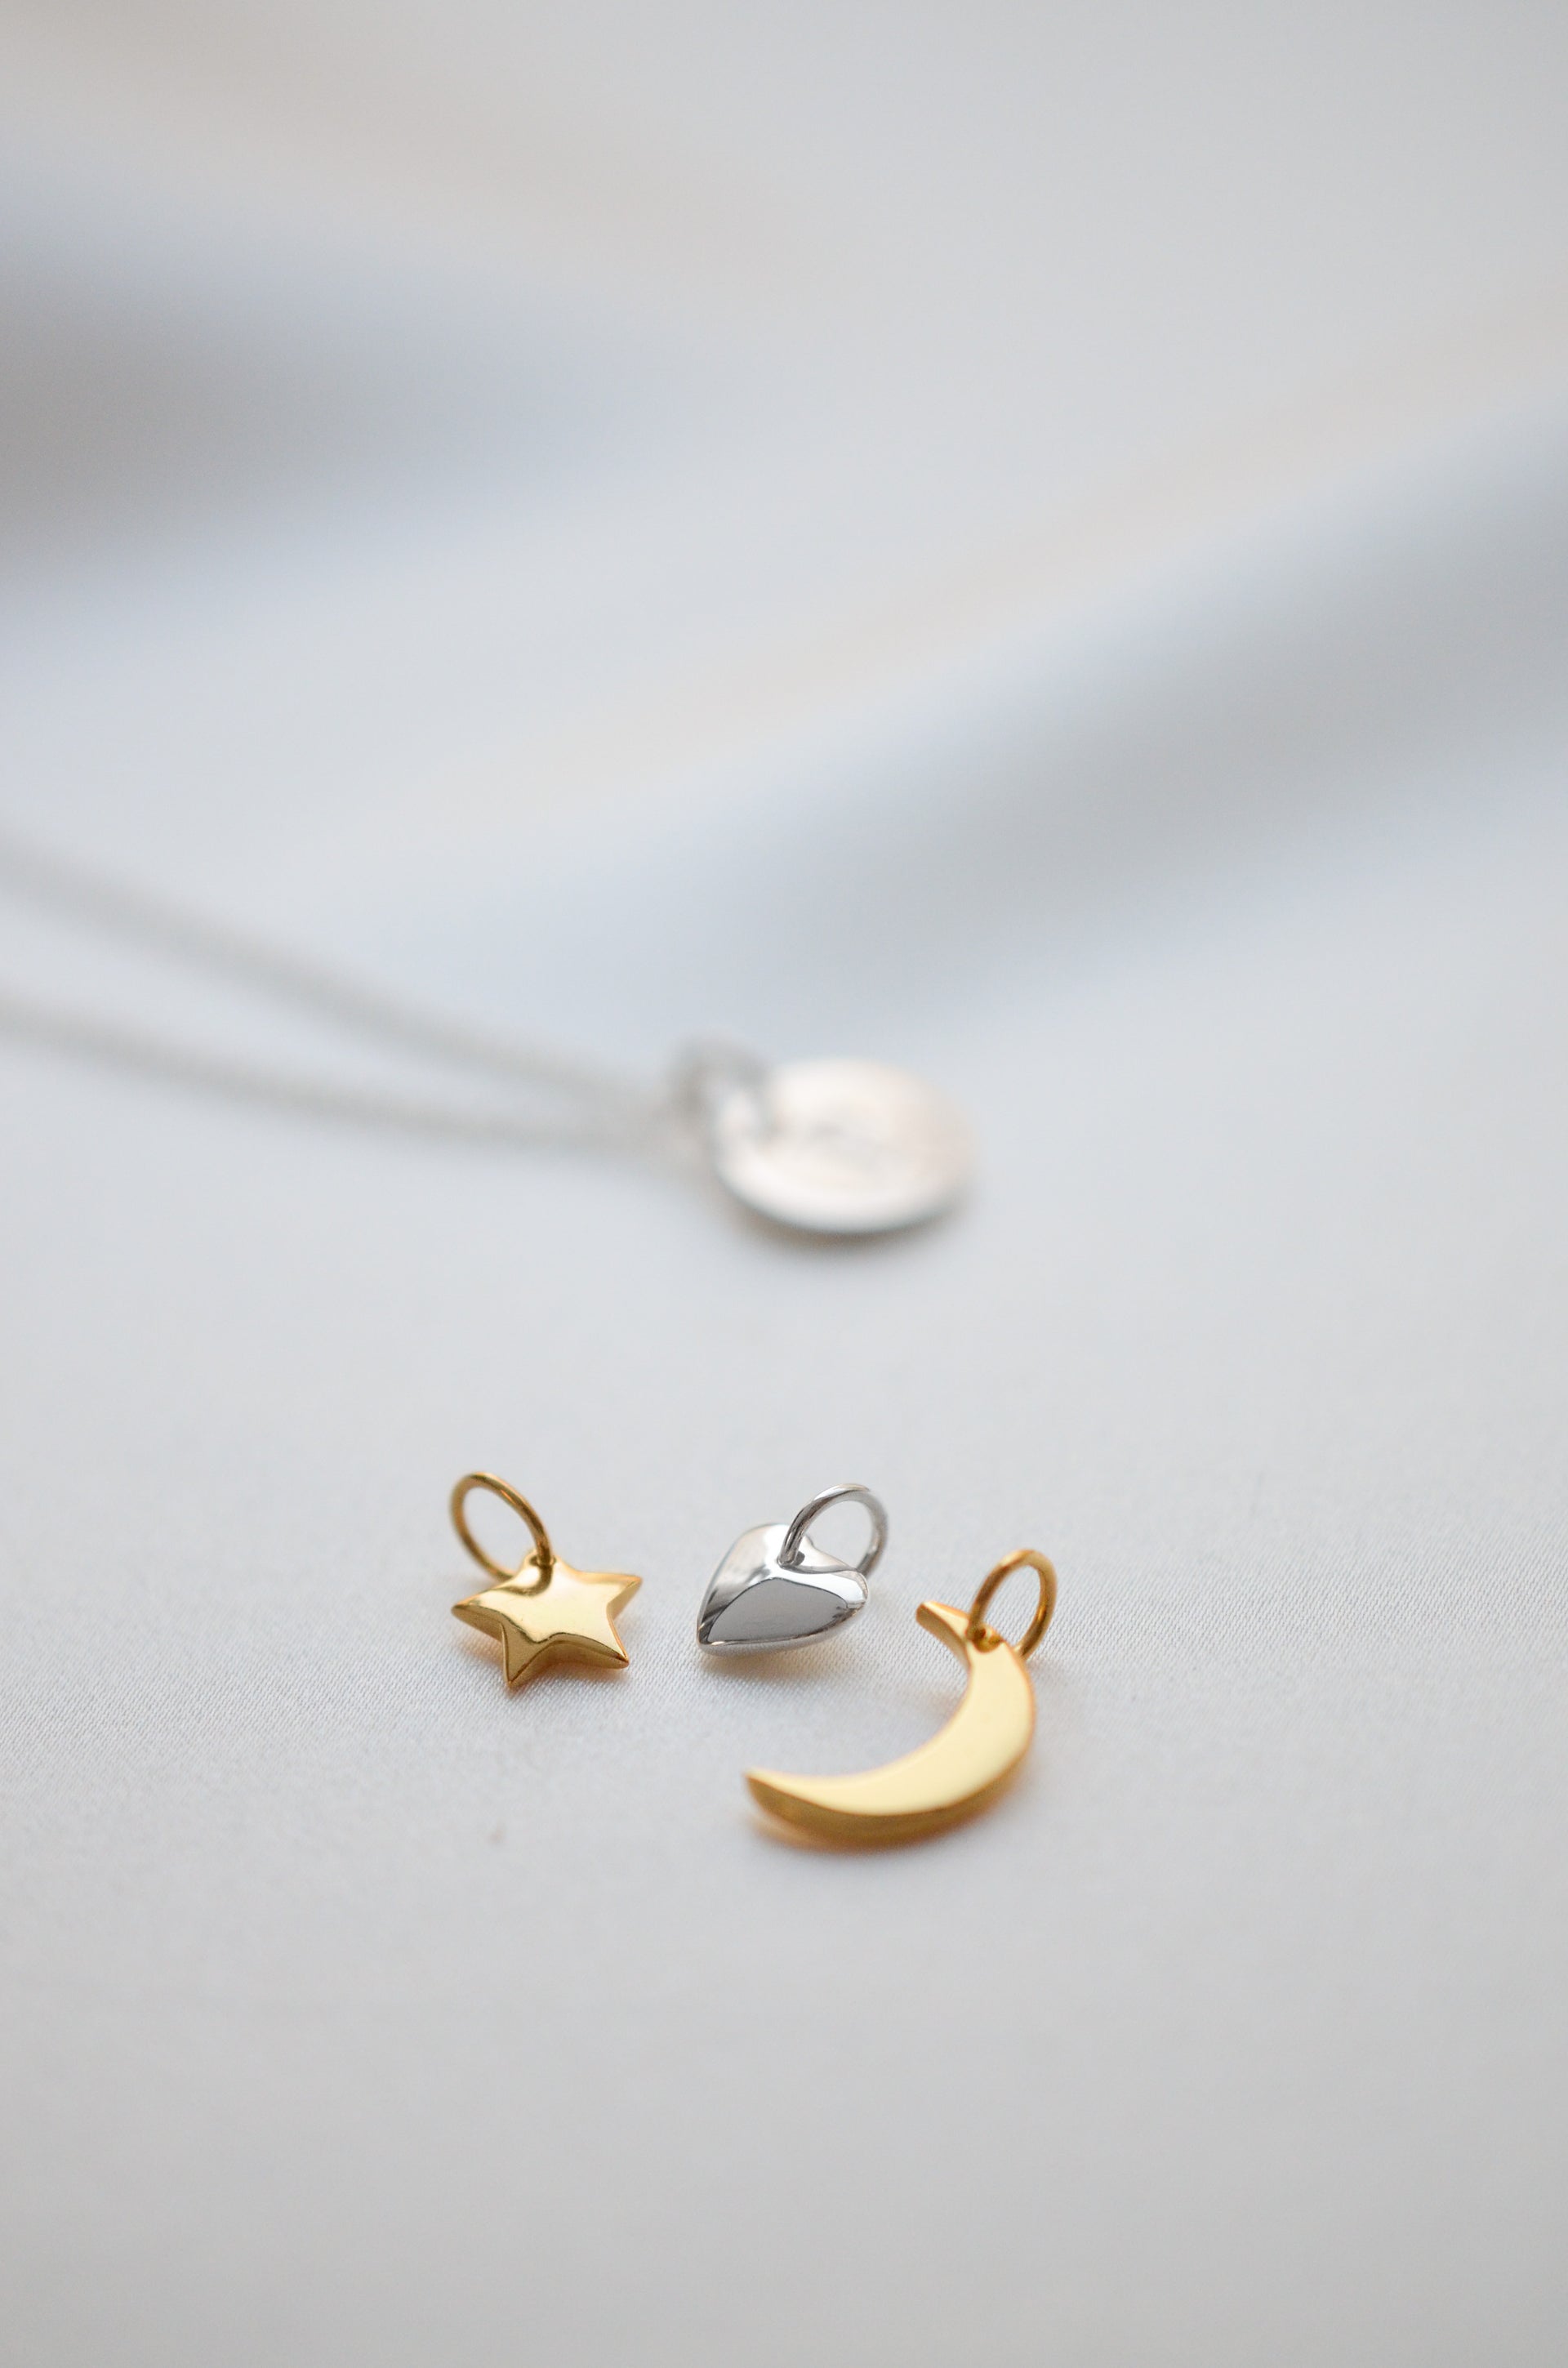 Gold star pendant, gold moon pendant and silver heart pendant styled together